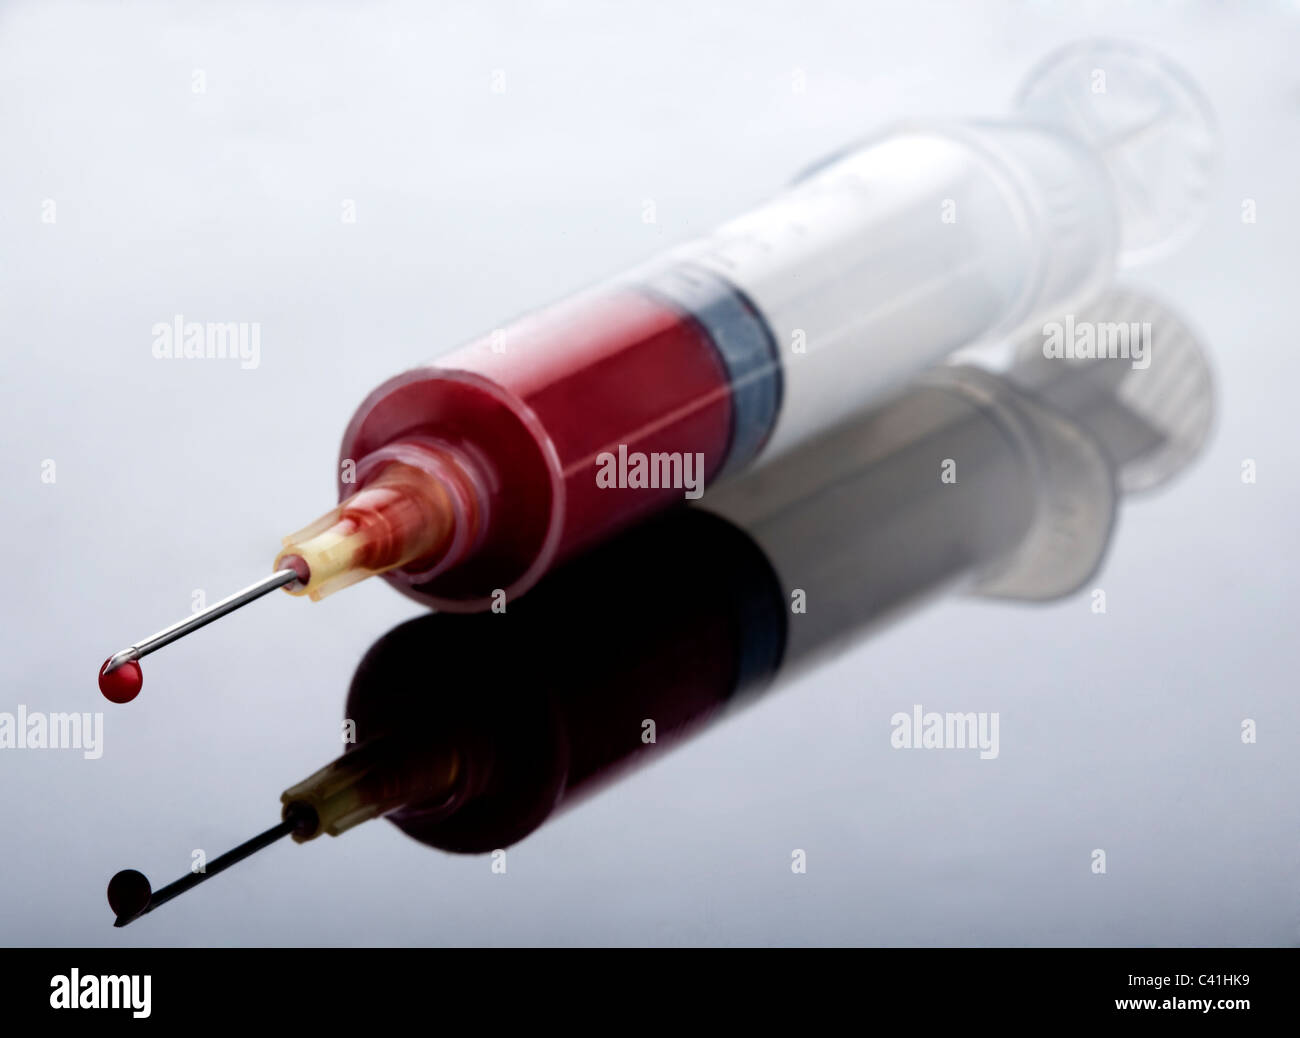 hypodermic needle with blood Stock Photo